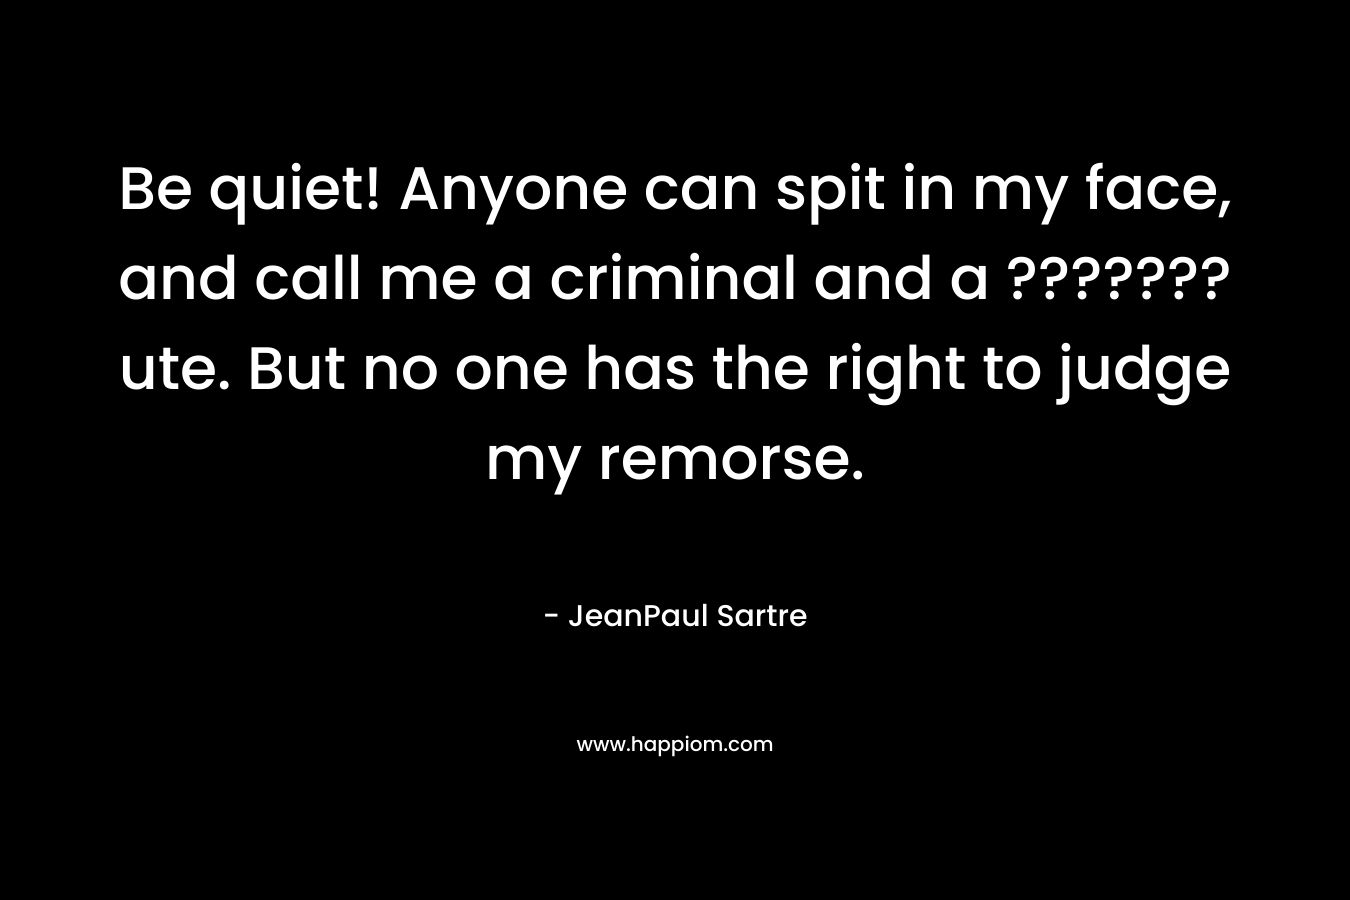 Be quiet! Anyone can spit in my face, and call me a criminal and a ???????ute. But no one has the right to judge my remorse.